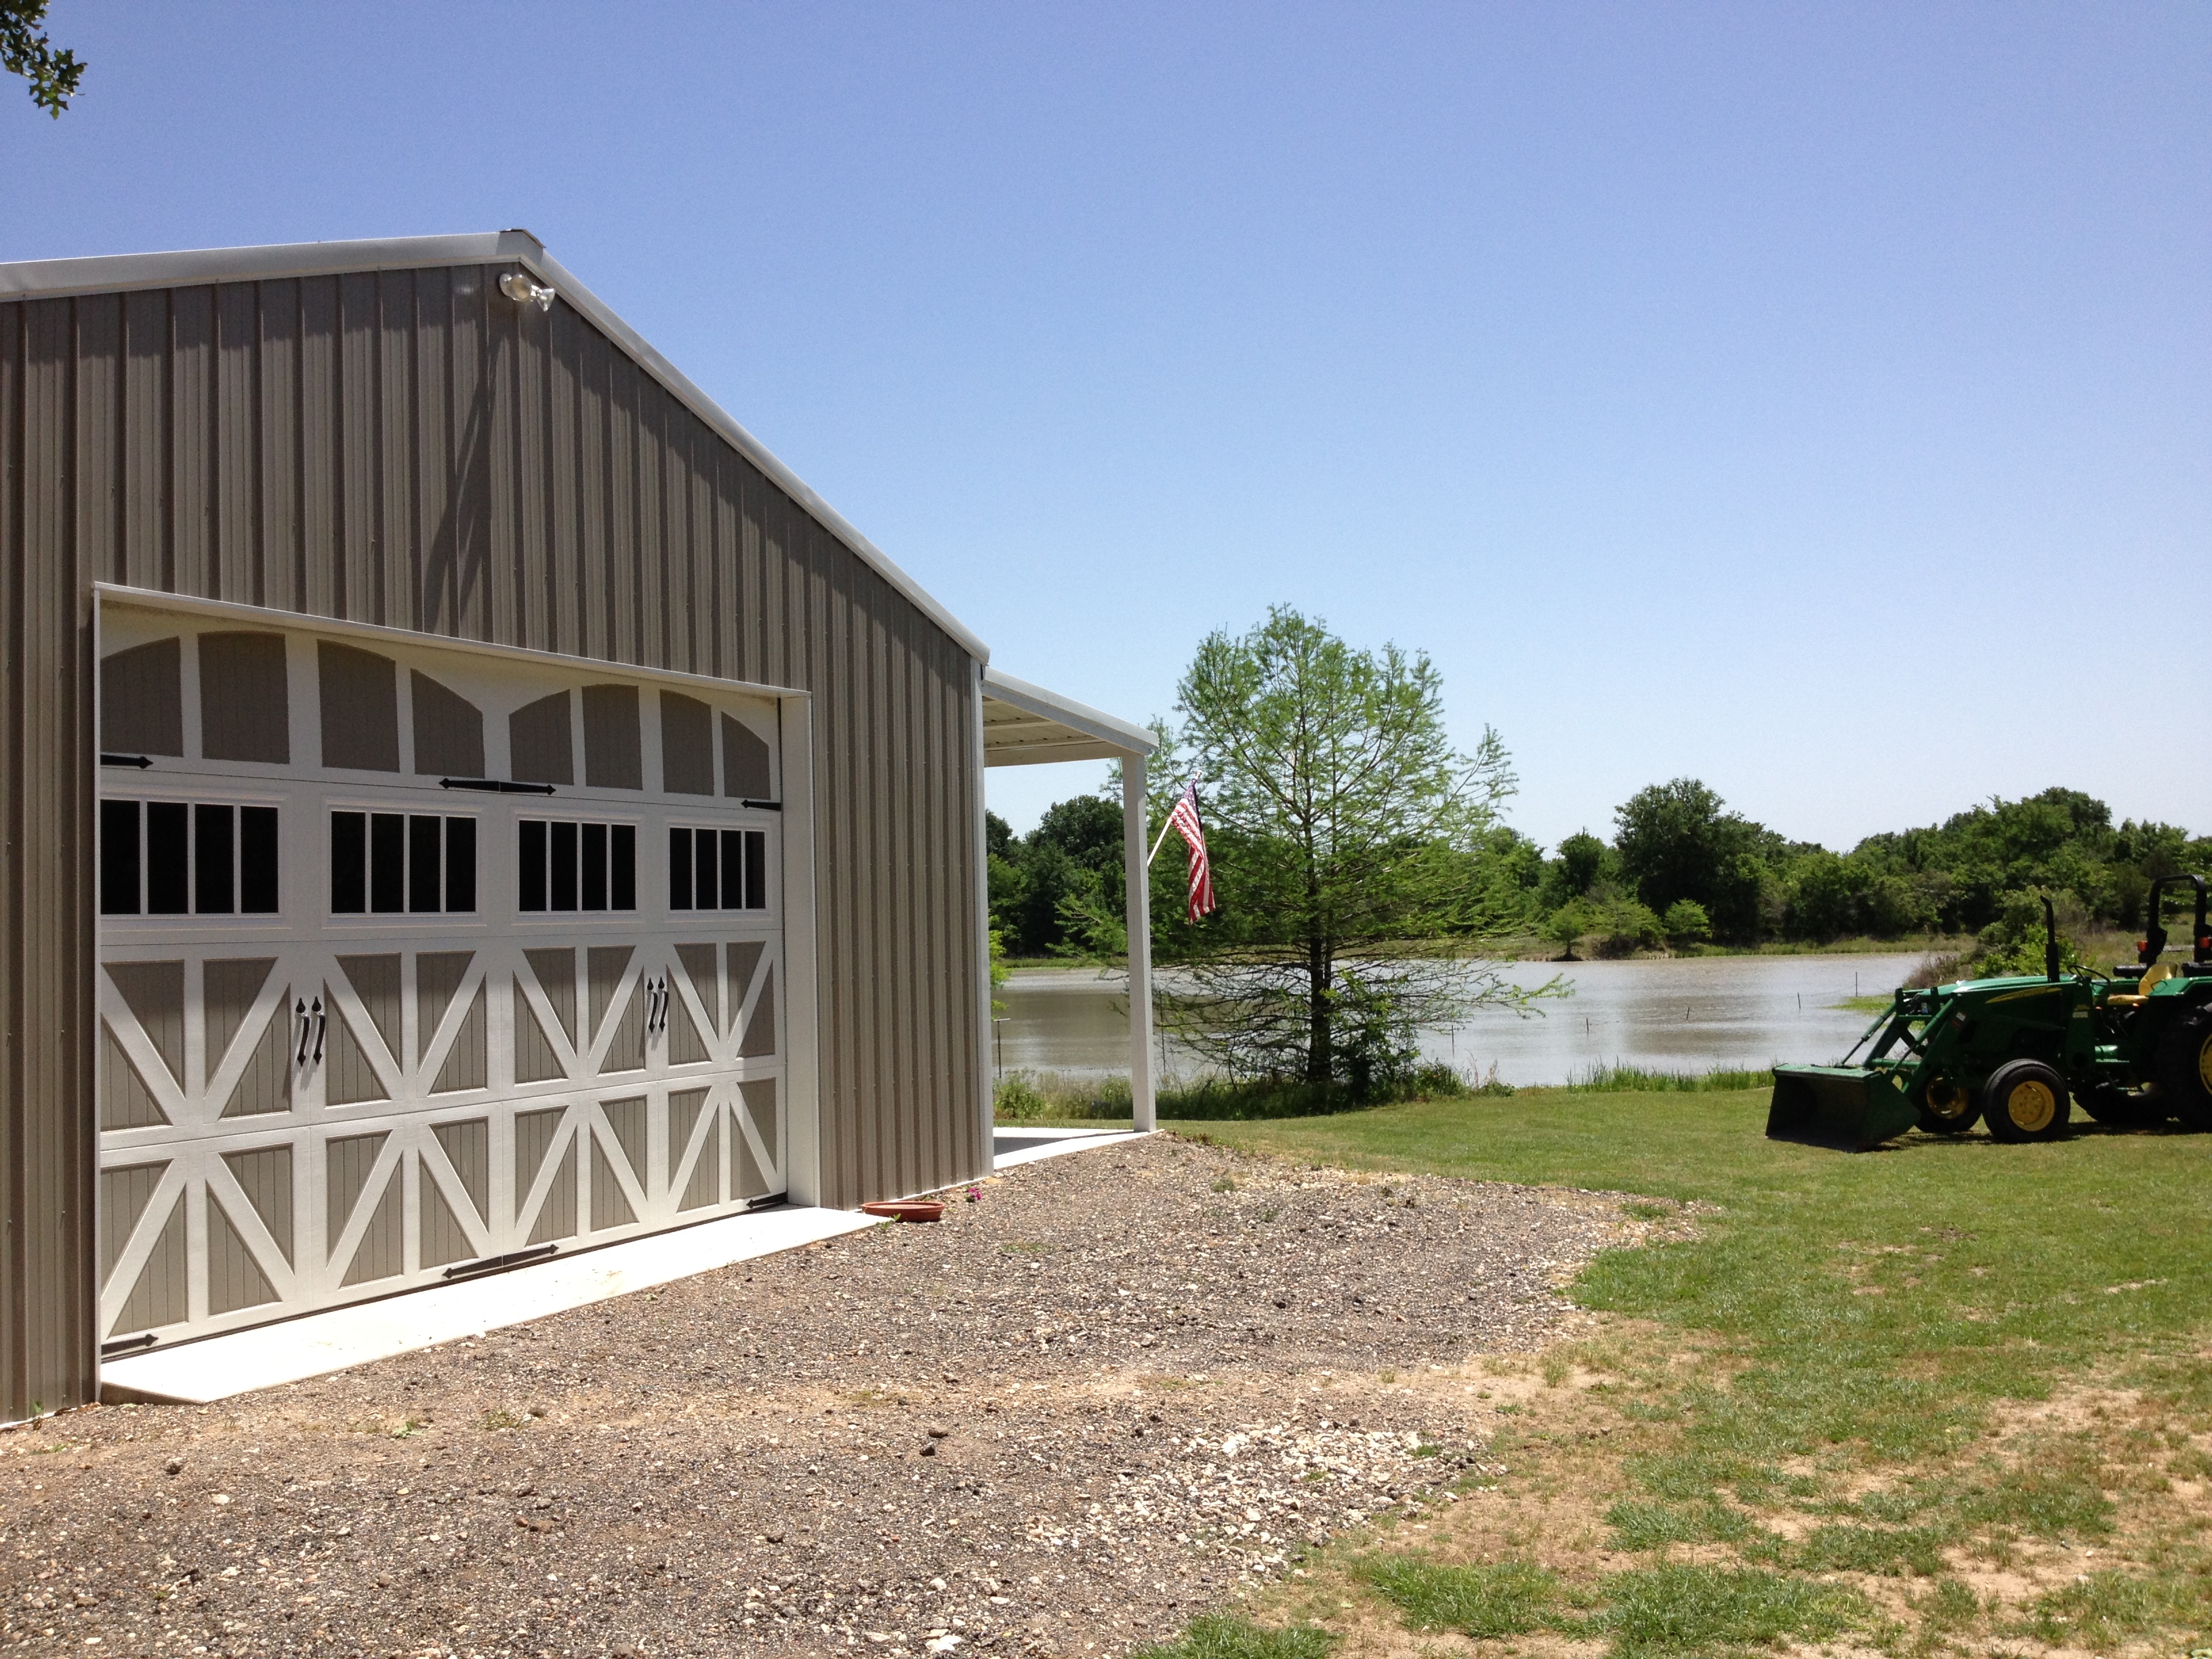 Amarr Classica garage doors come in solid, woodgrain, and two-tone colors.